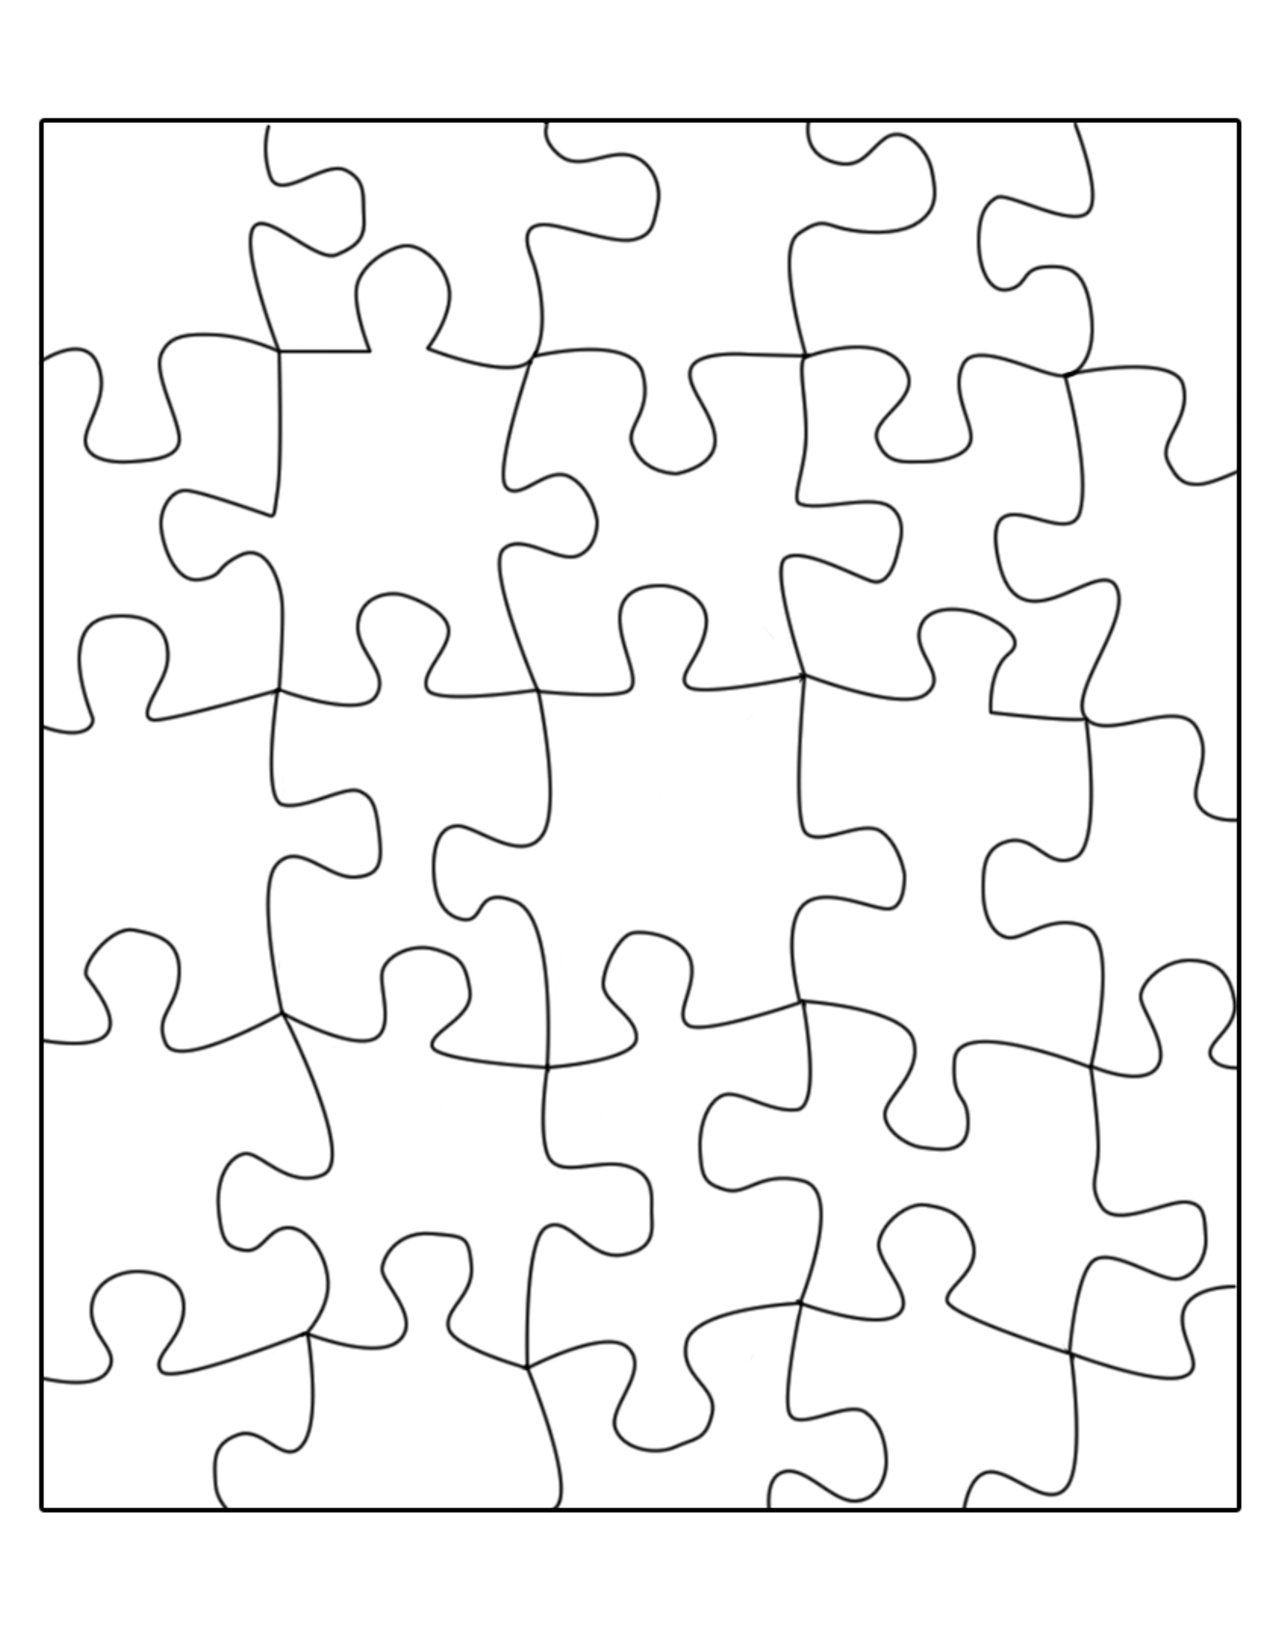 Free Puzzle Template, Download Free Clip Art, Free Clip Art Throughout Blank Jigsaw Piece Template